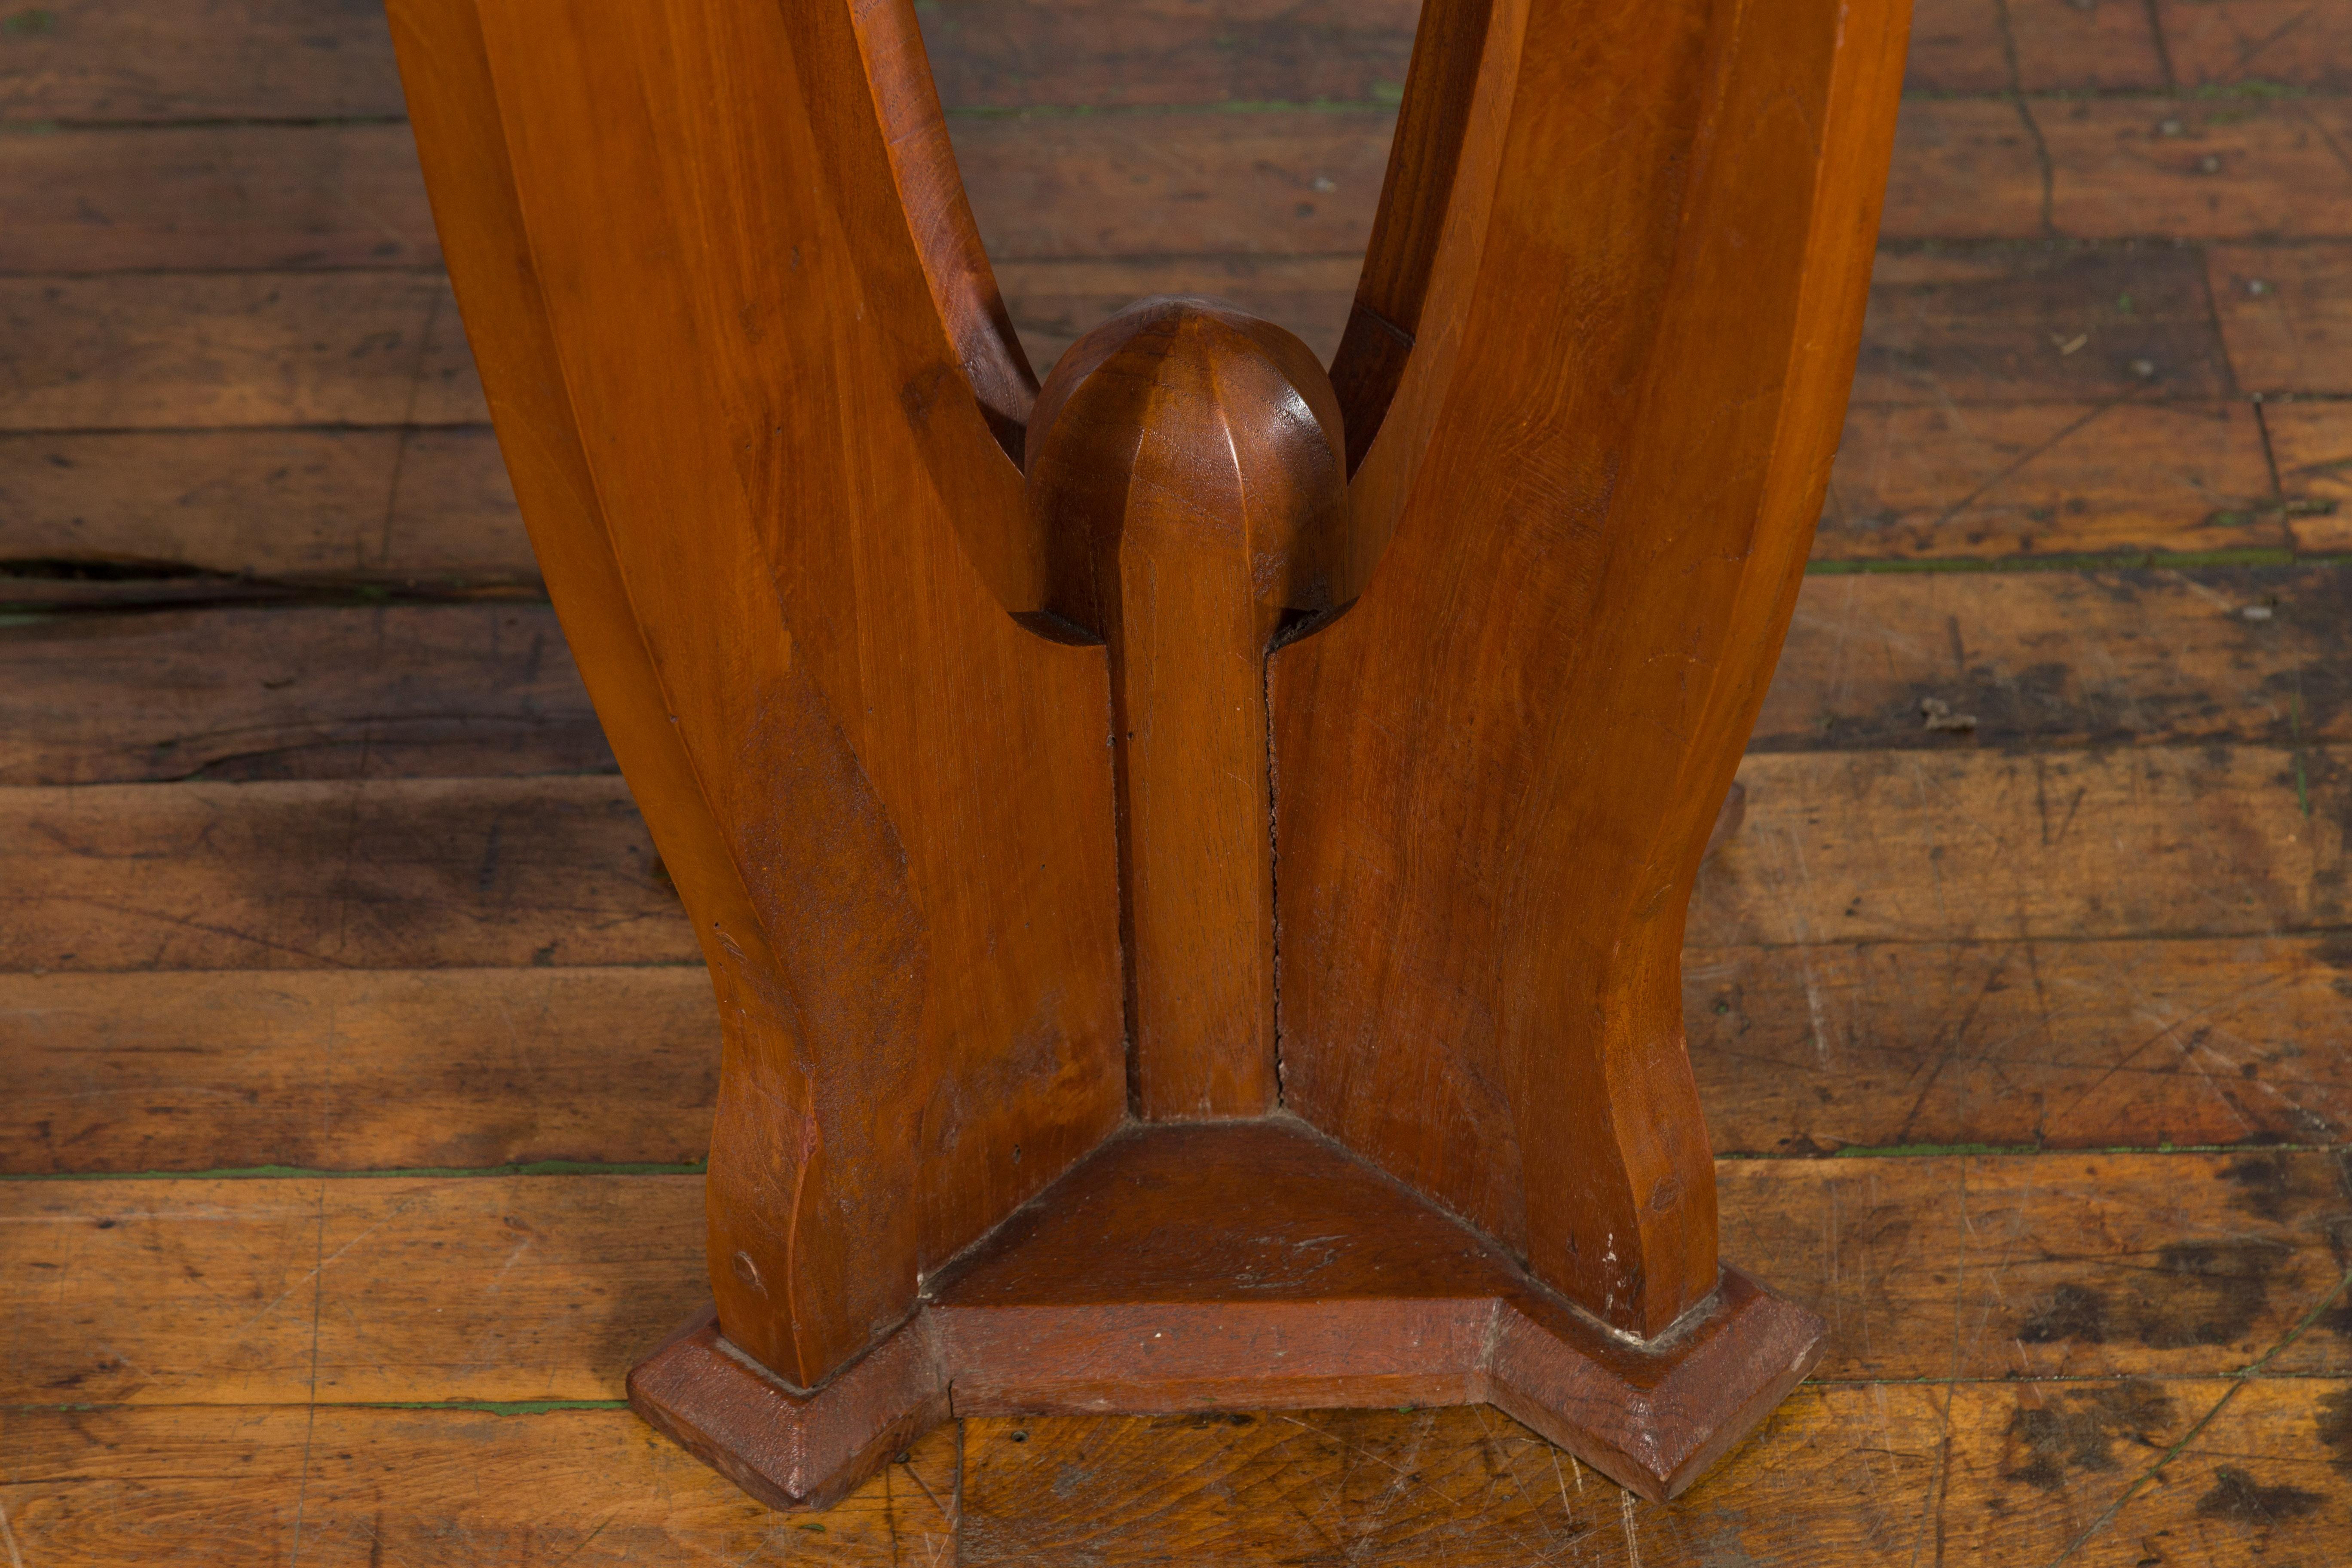 Large Pair of Javanese Art Deco Style Teak Wood Plant Stands with Brass Braces For Sale 2